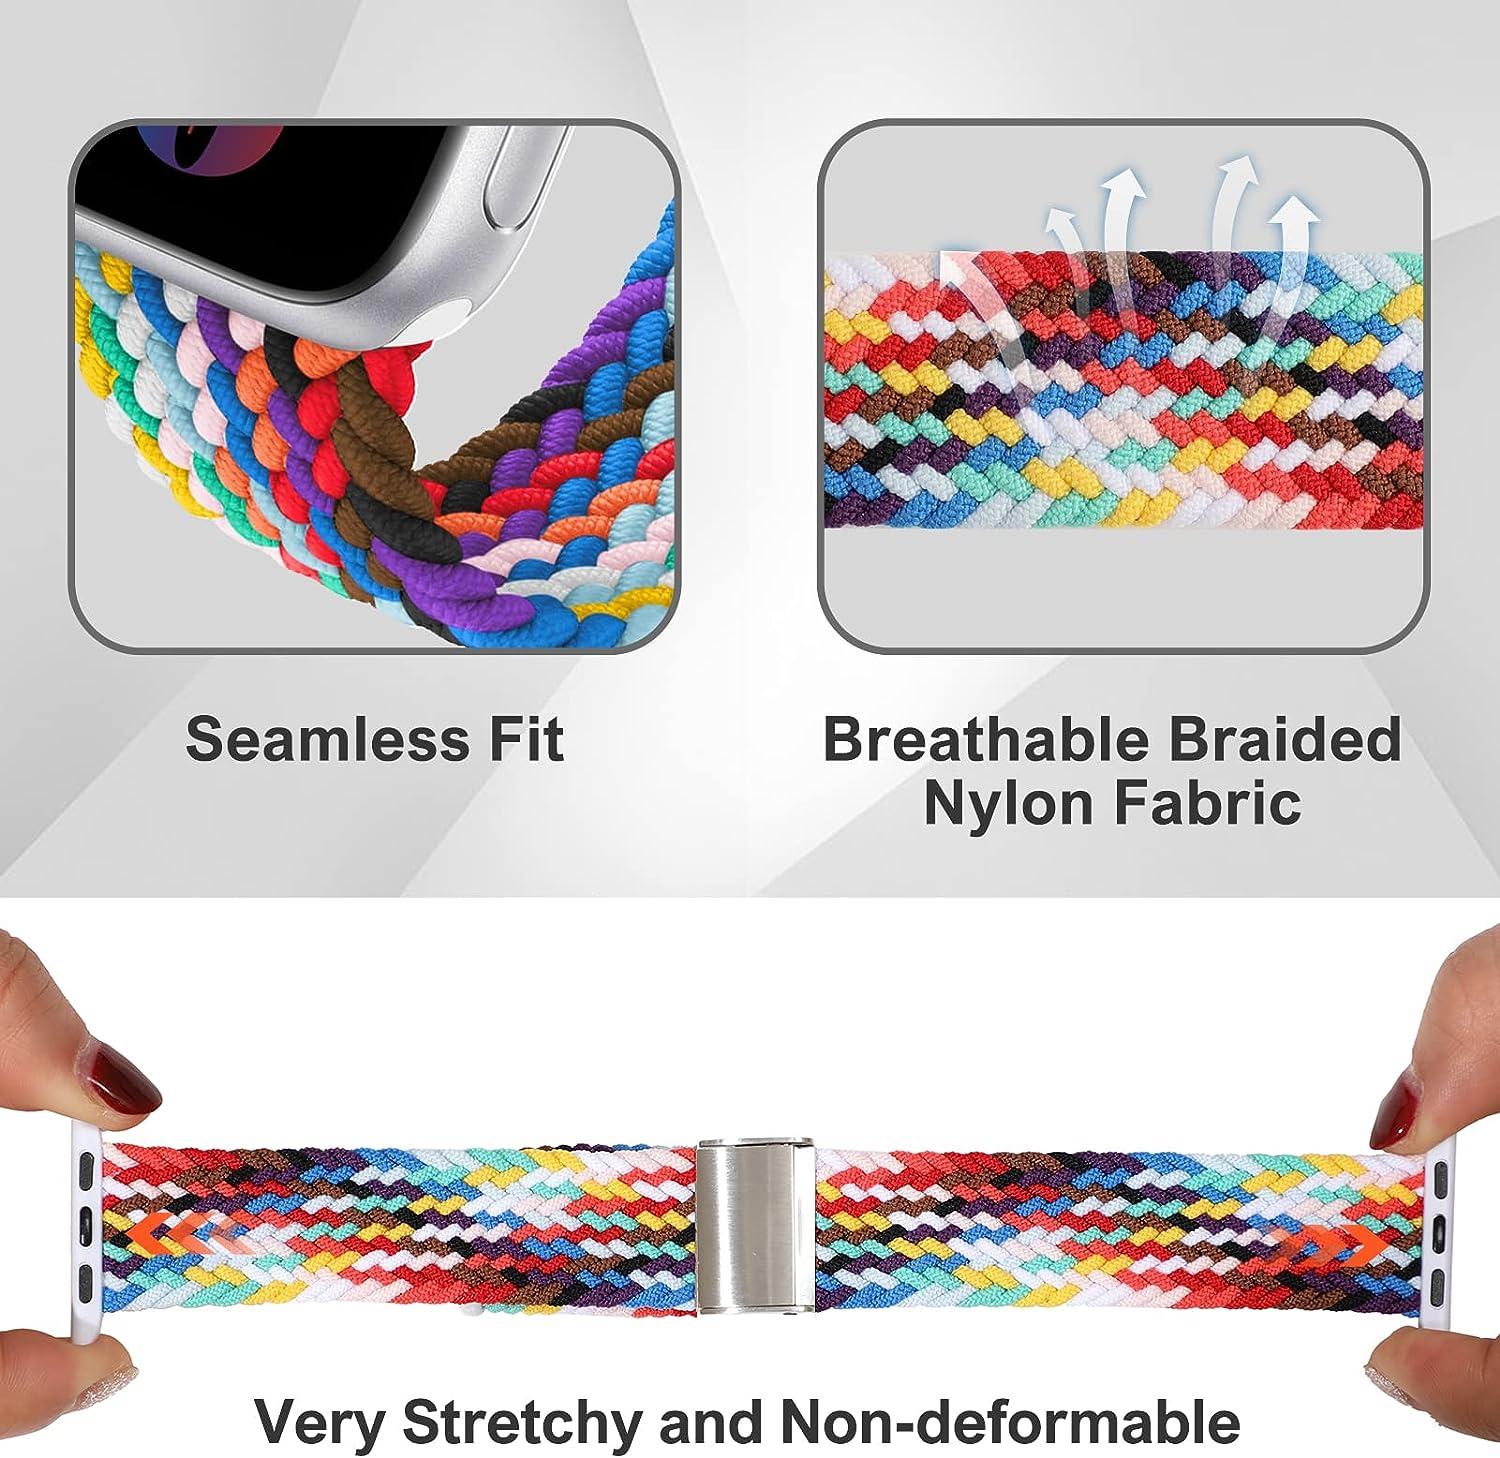 Braided Solo Loop Strap for Apple Watch Band 44mm 40mm 45mm 41mm